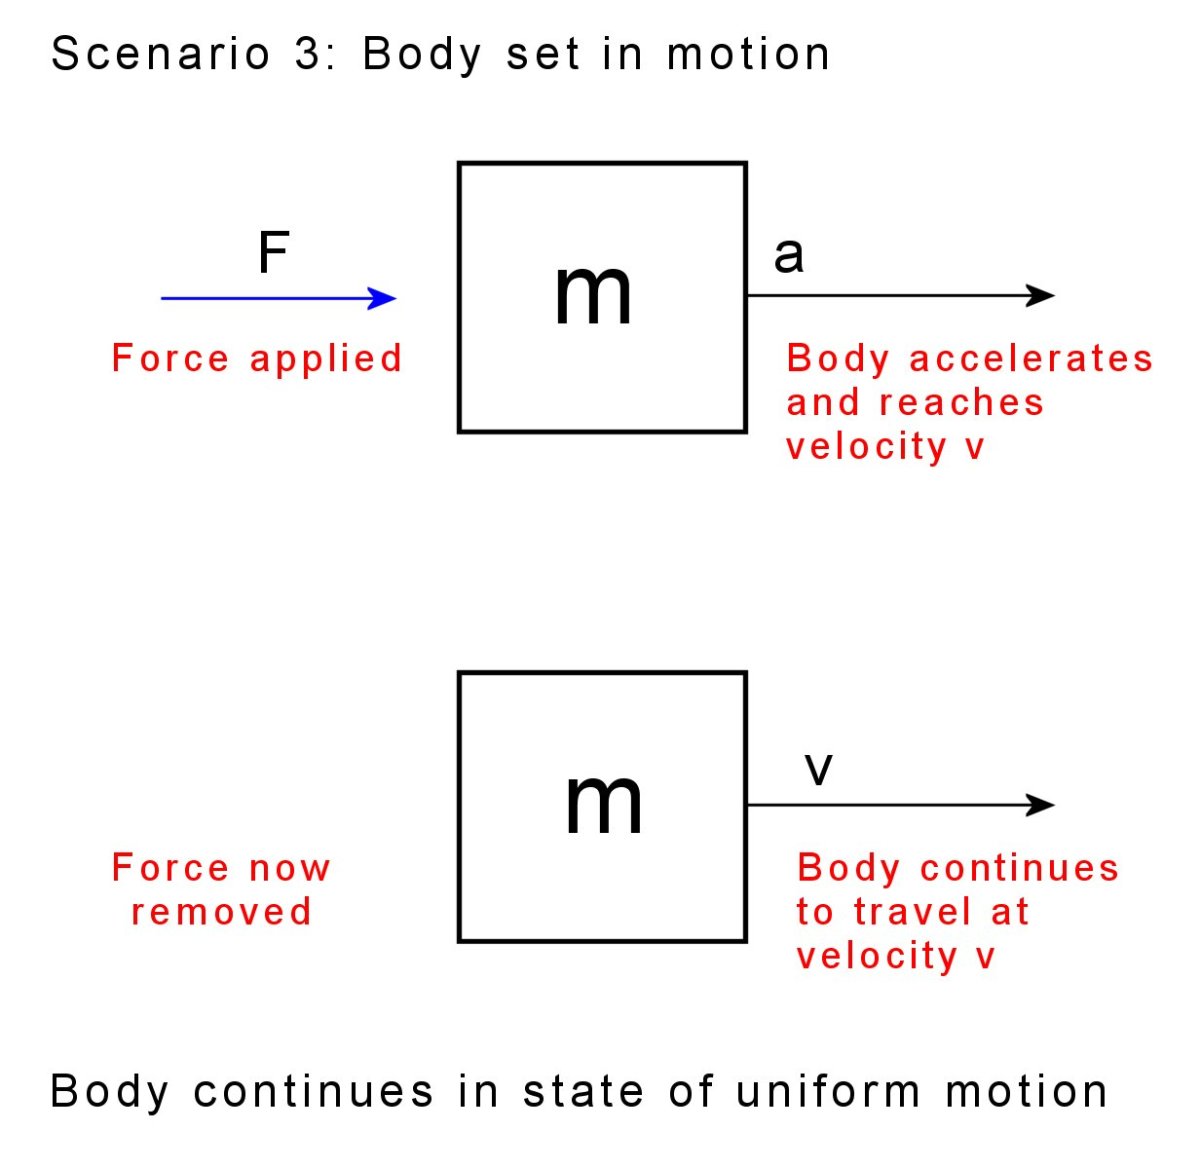 Once a body is accelerated by a force, it continues in a state of uniform motion, unless another force acts on it.